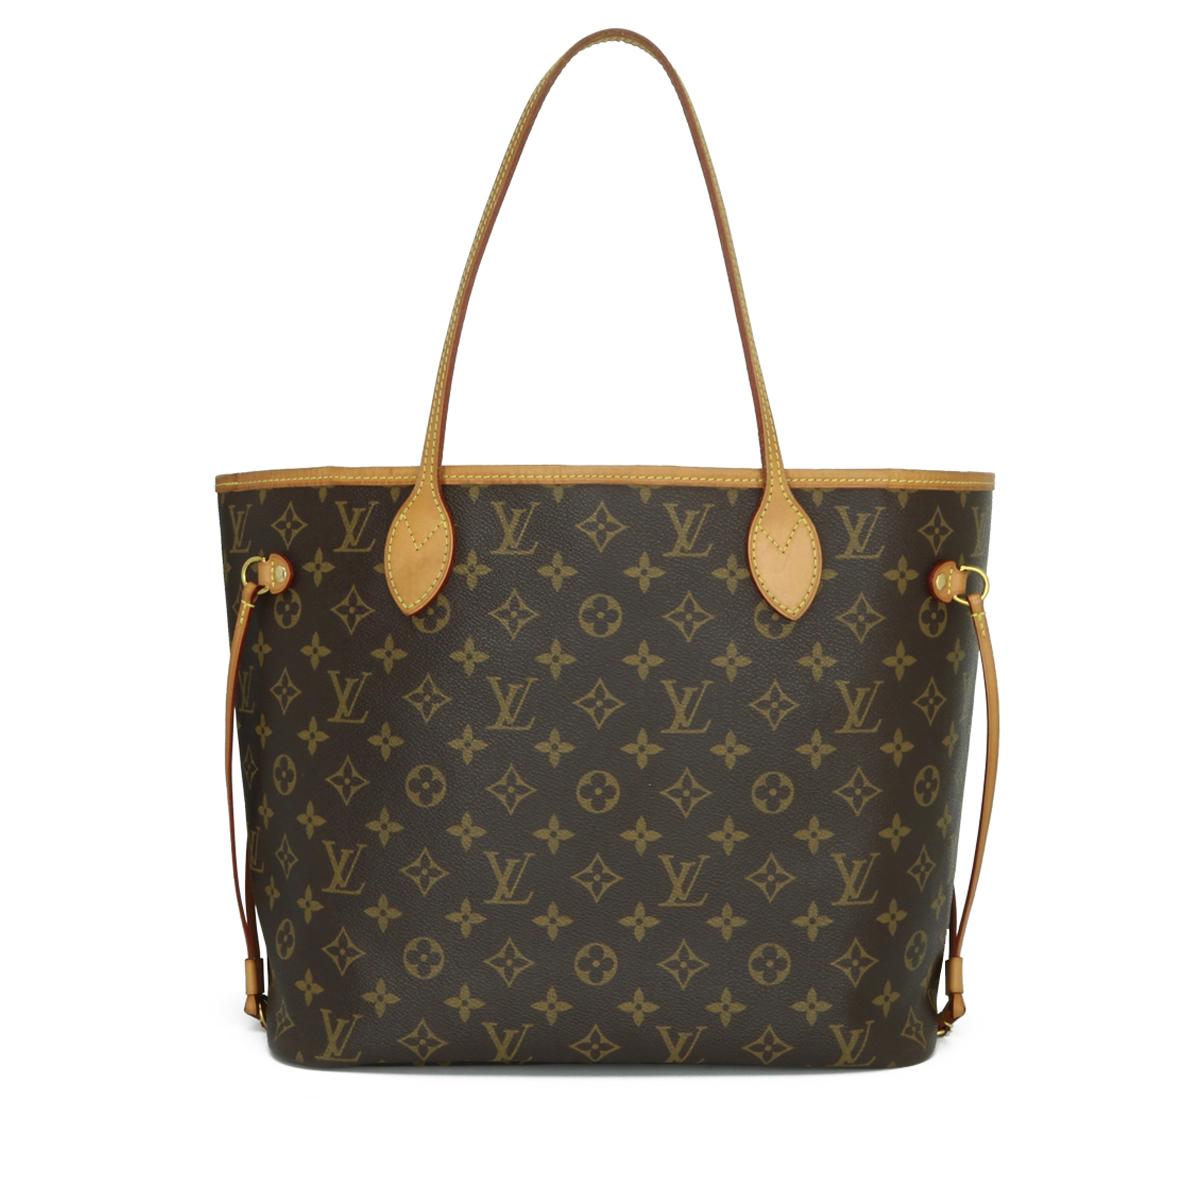 Louis Vuitton Neverfull MM Tote in Monogram with Beige Interior 2018.

This bag is in good condition. 

- Exterior Condition: Good condition. Light scratches and light storage creasing to the canvas. Light surface rubbing to four base corners.